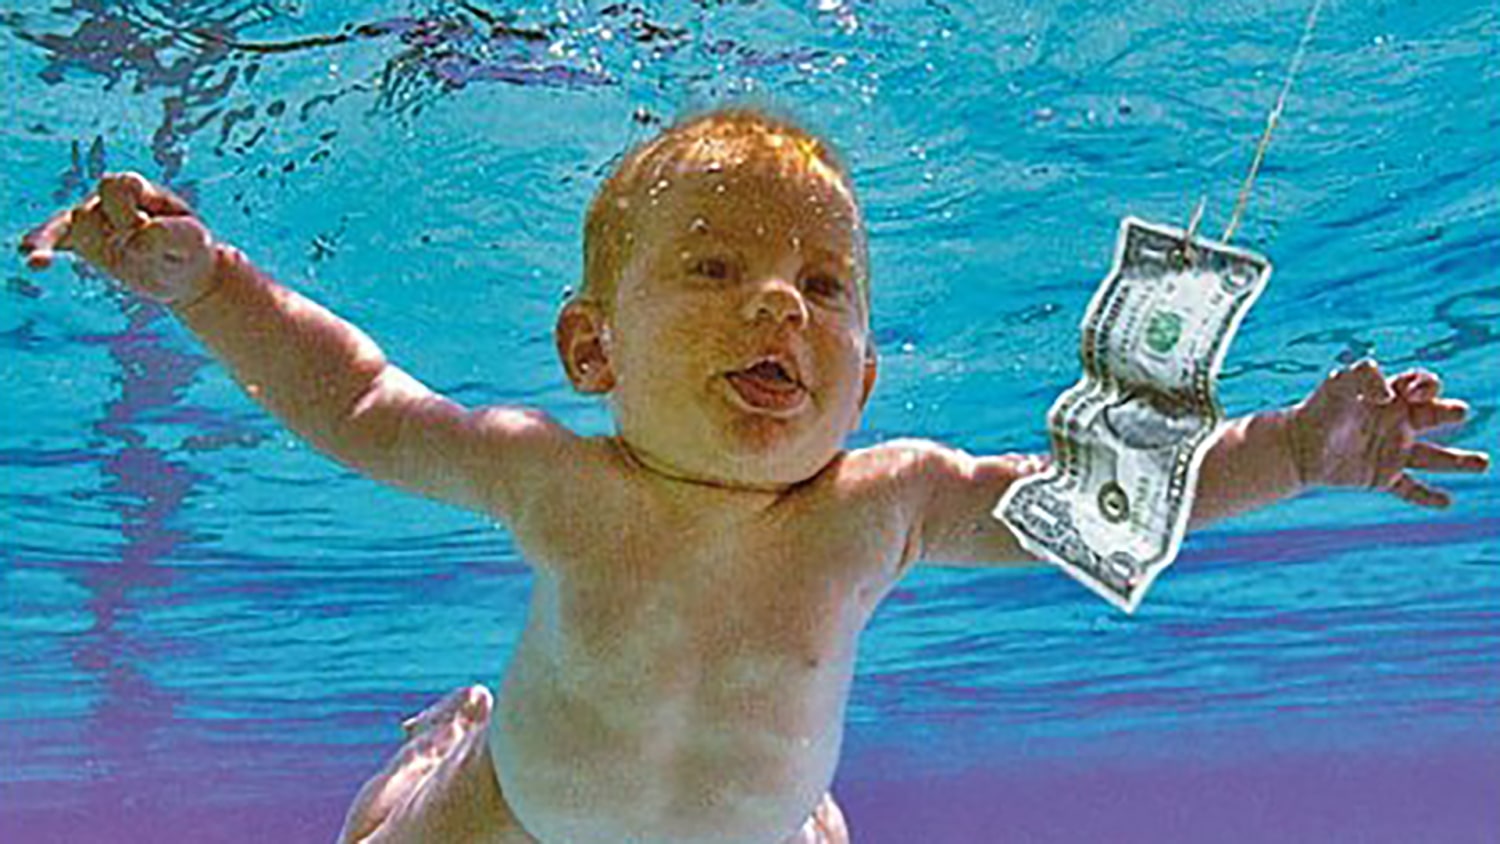 Man photographed as baby on 'Nevermind' cover sues Nirvana, alleging child  pornography